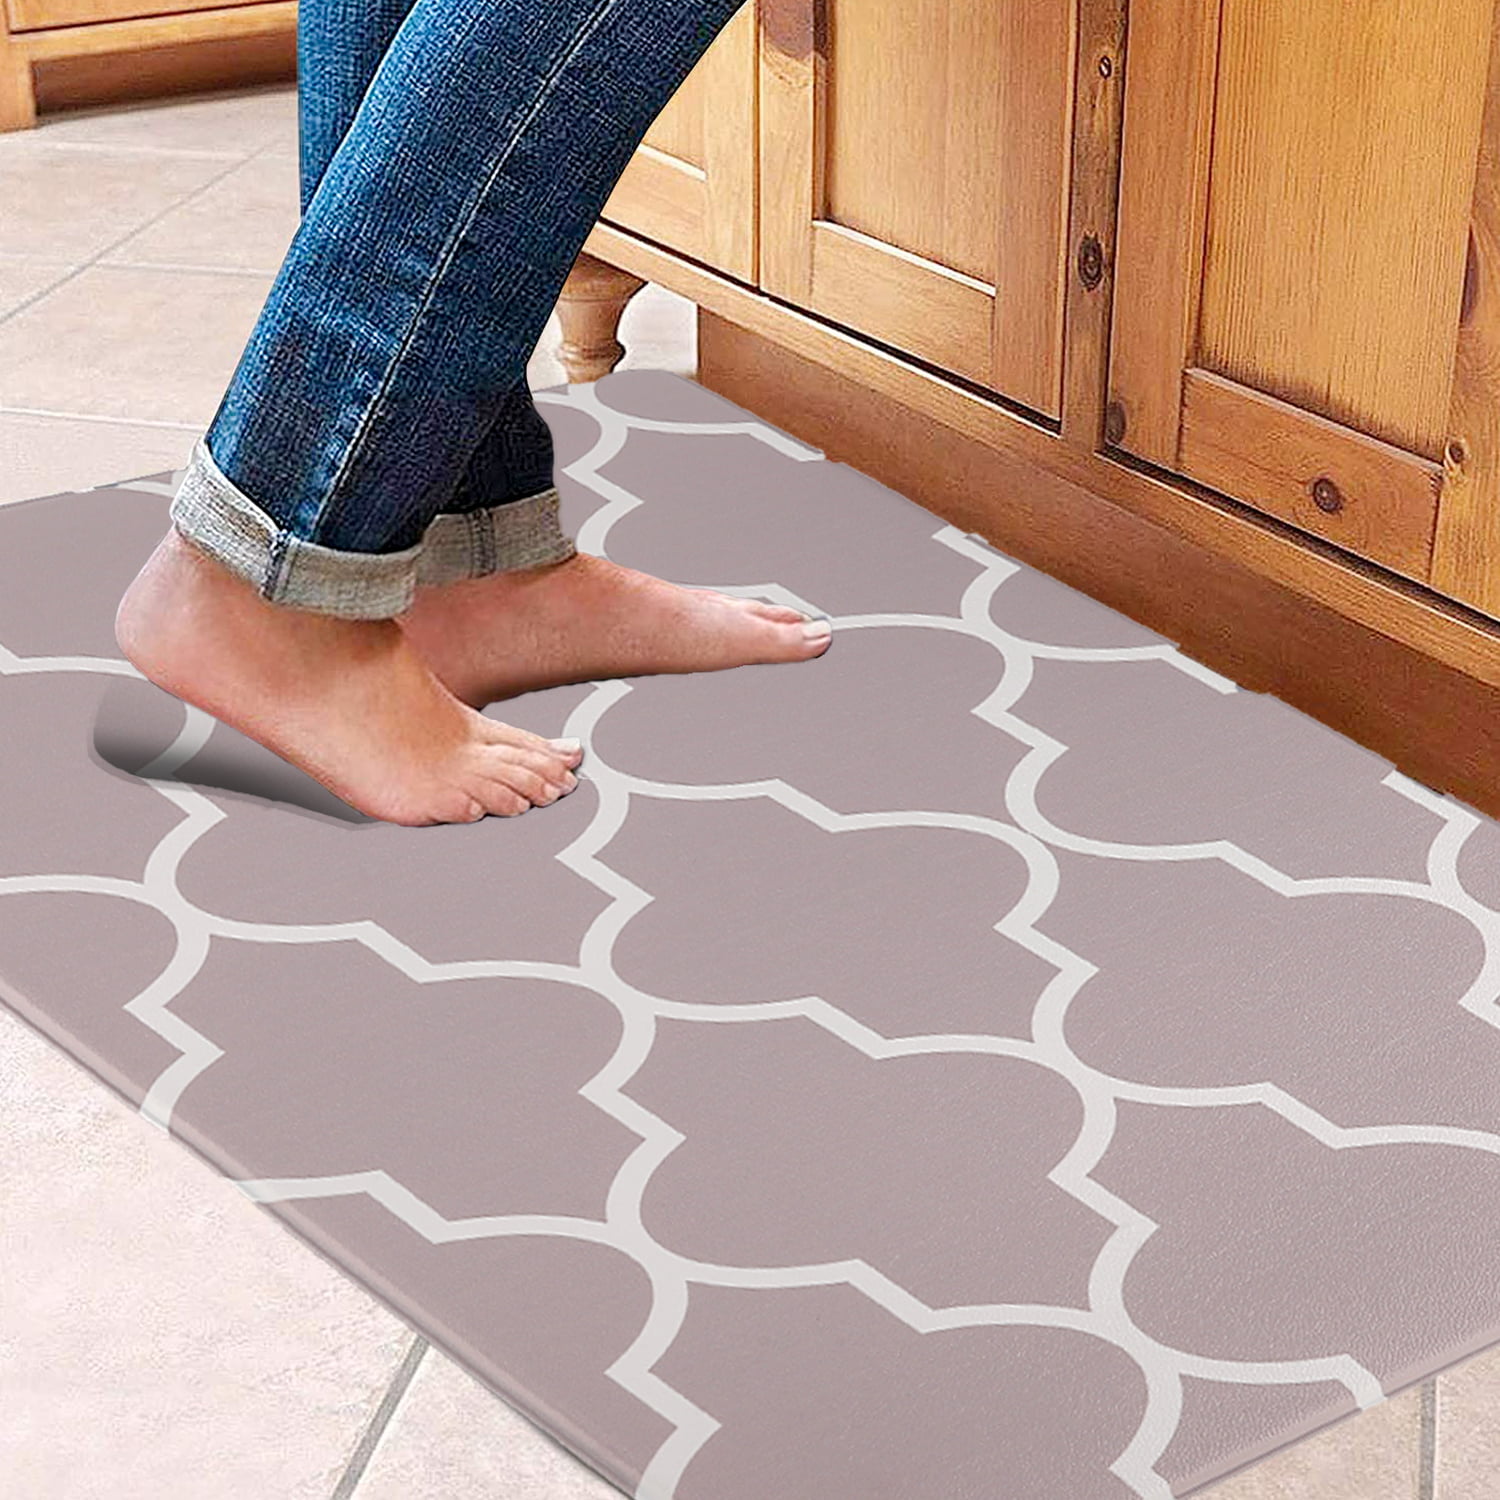 Details about   HappyTrends Kitchen Mat Cushioned Anti-Fatigue Kitchen Rug,17.3"x 28",Thick Wate 